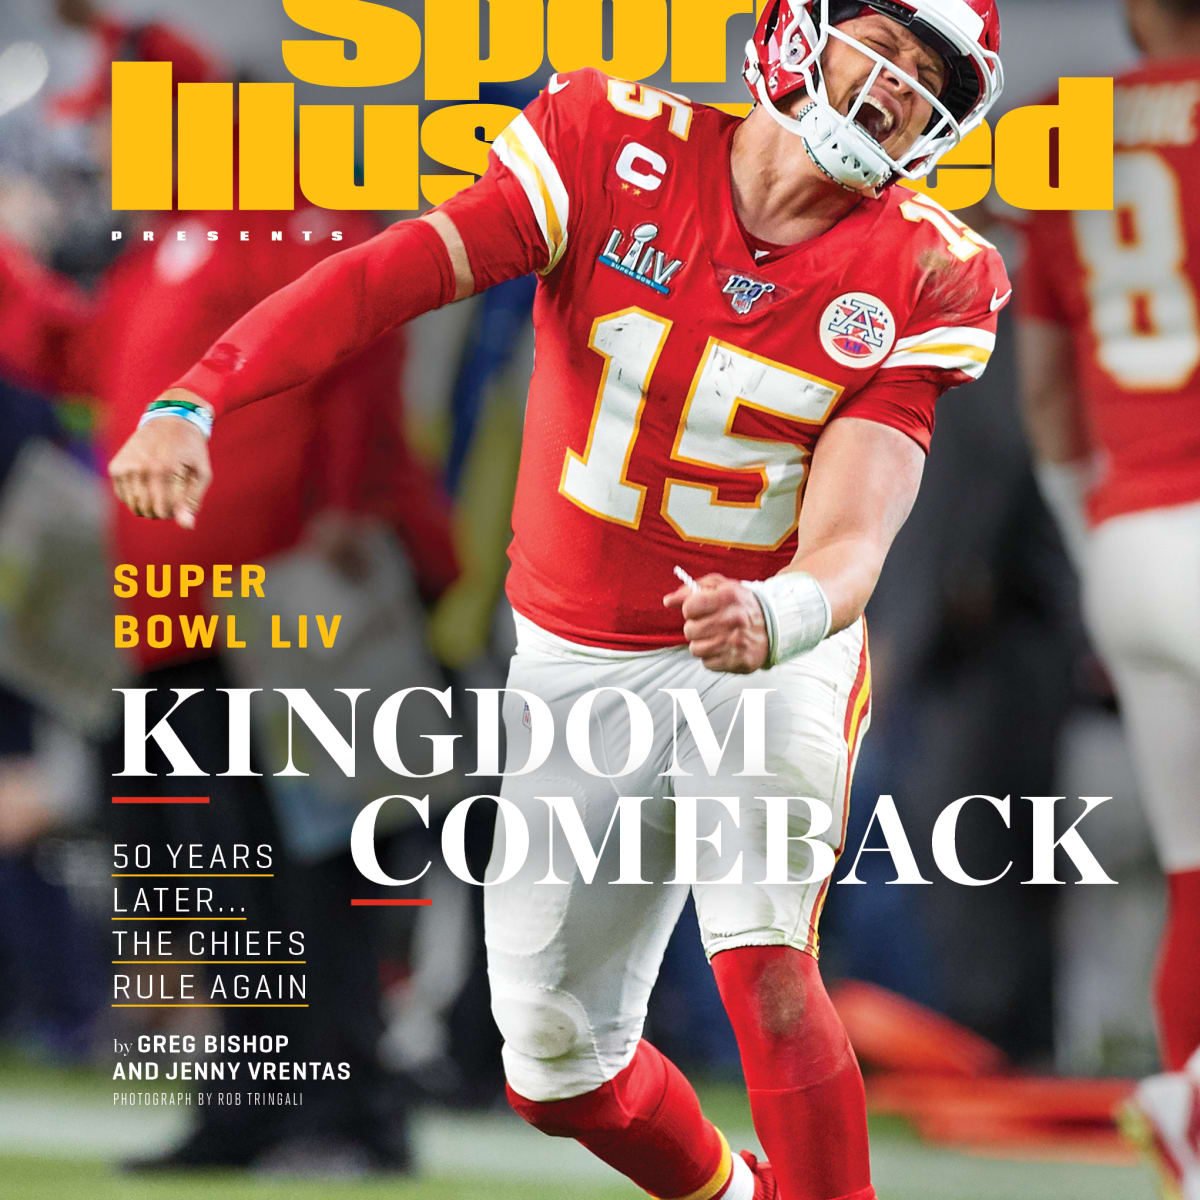 Chiefs favored to win Super Bowl LVIII - Sports Illustrated